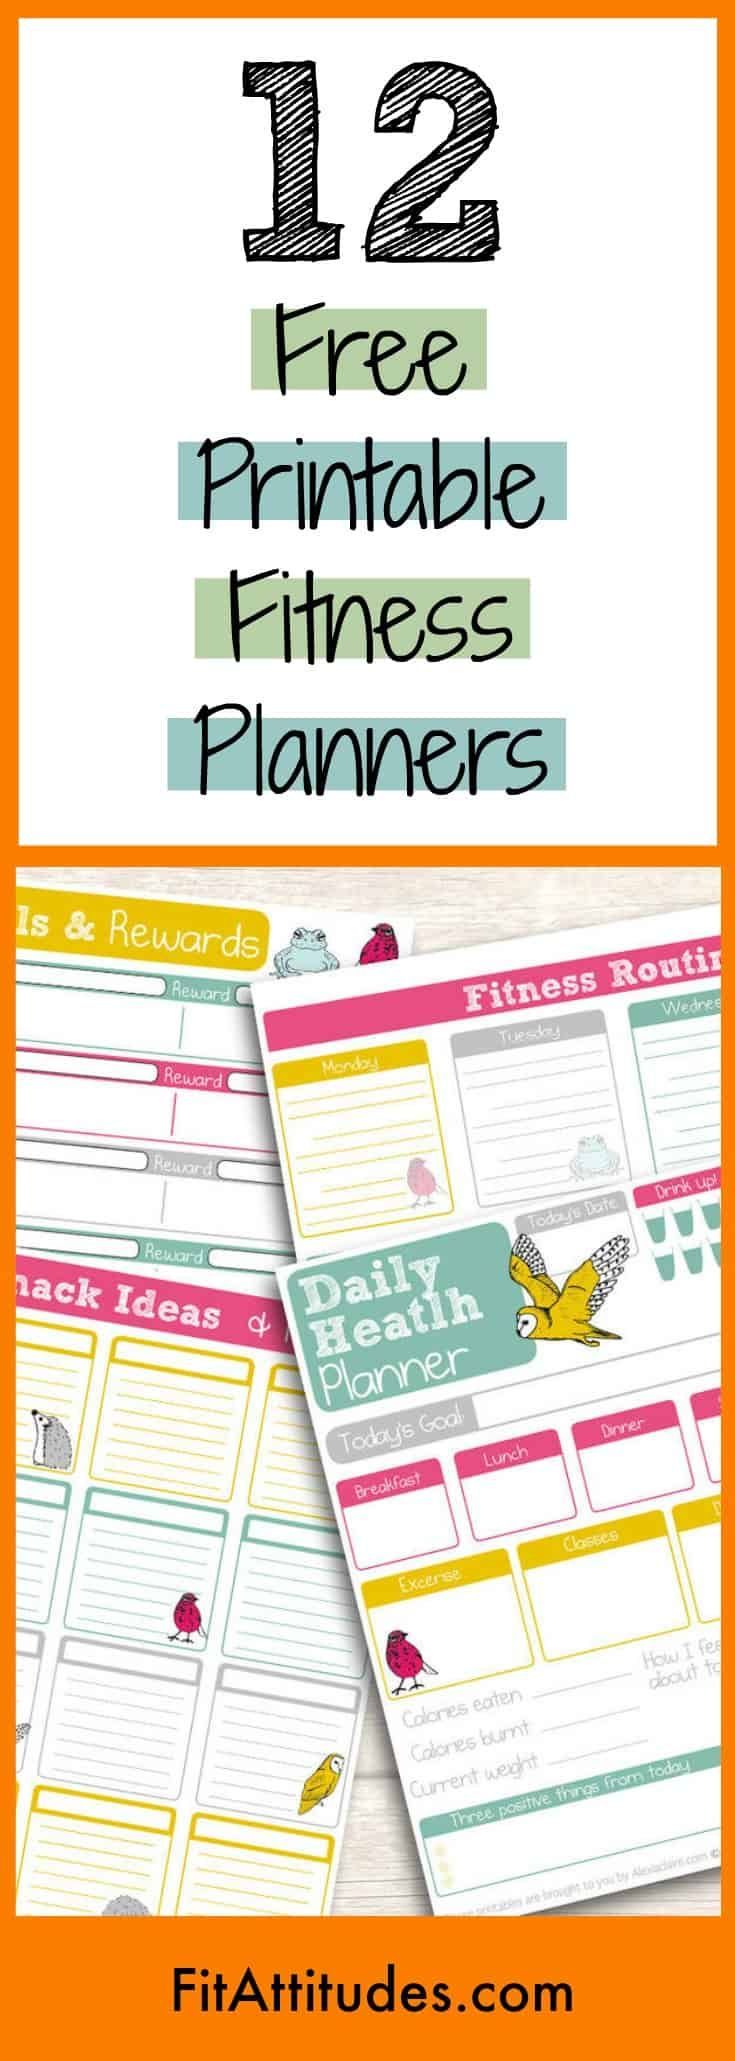 Free Printable Fitness Planners for Fitness Goal Setting -   17 fitness Planner ideas